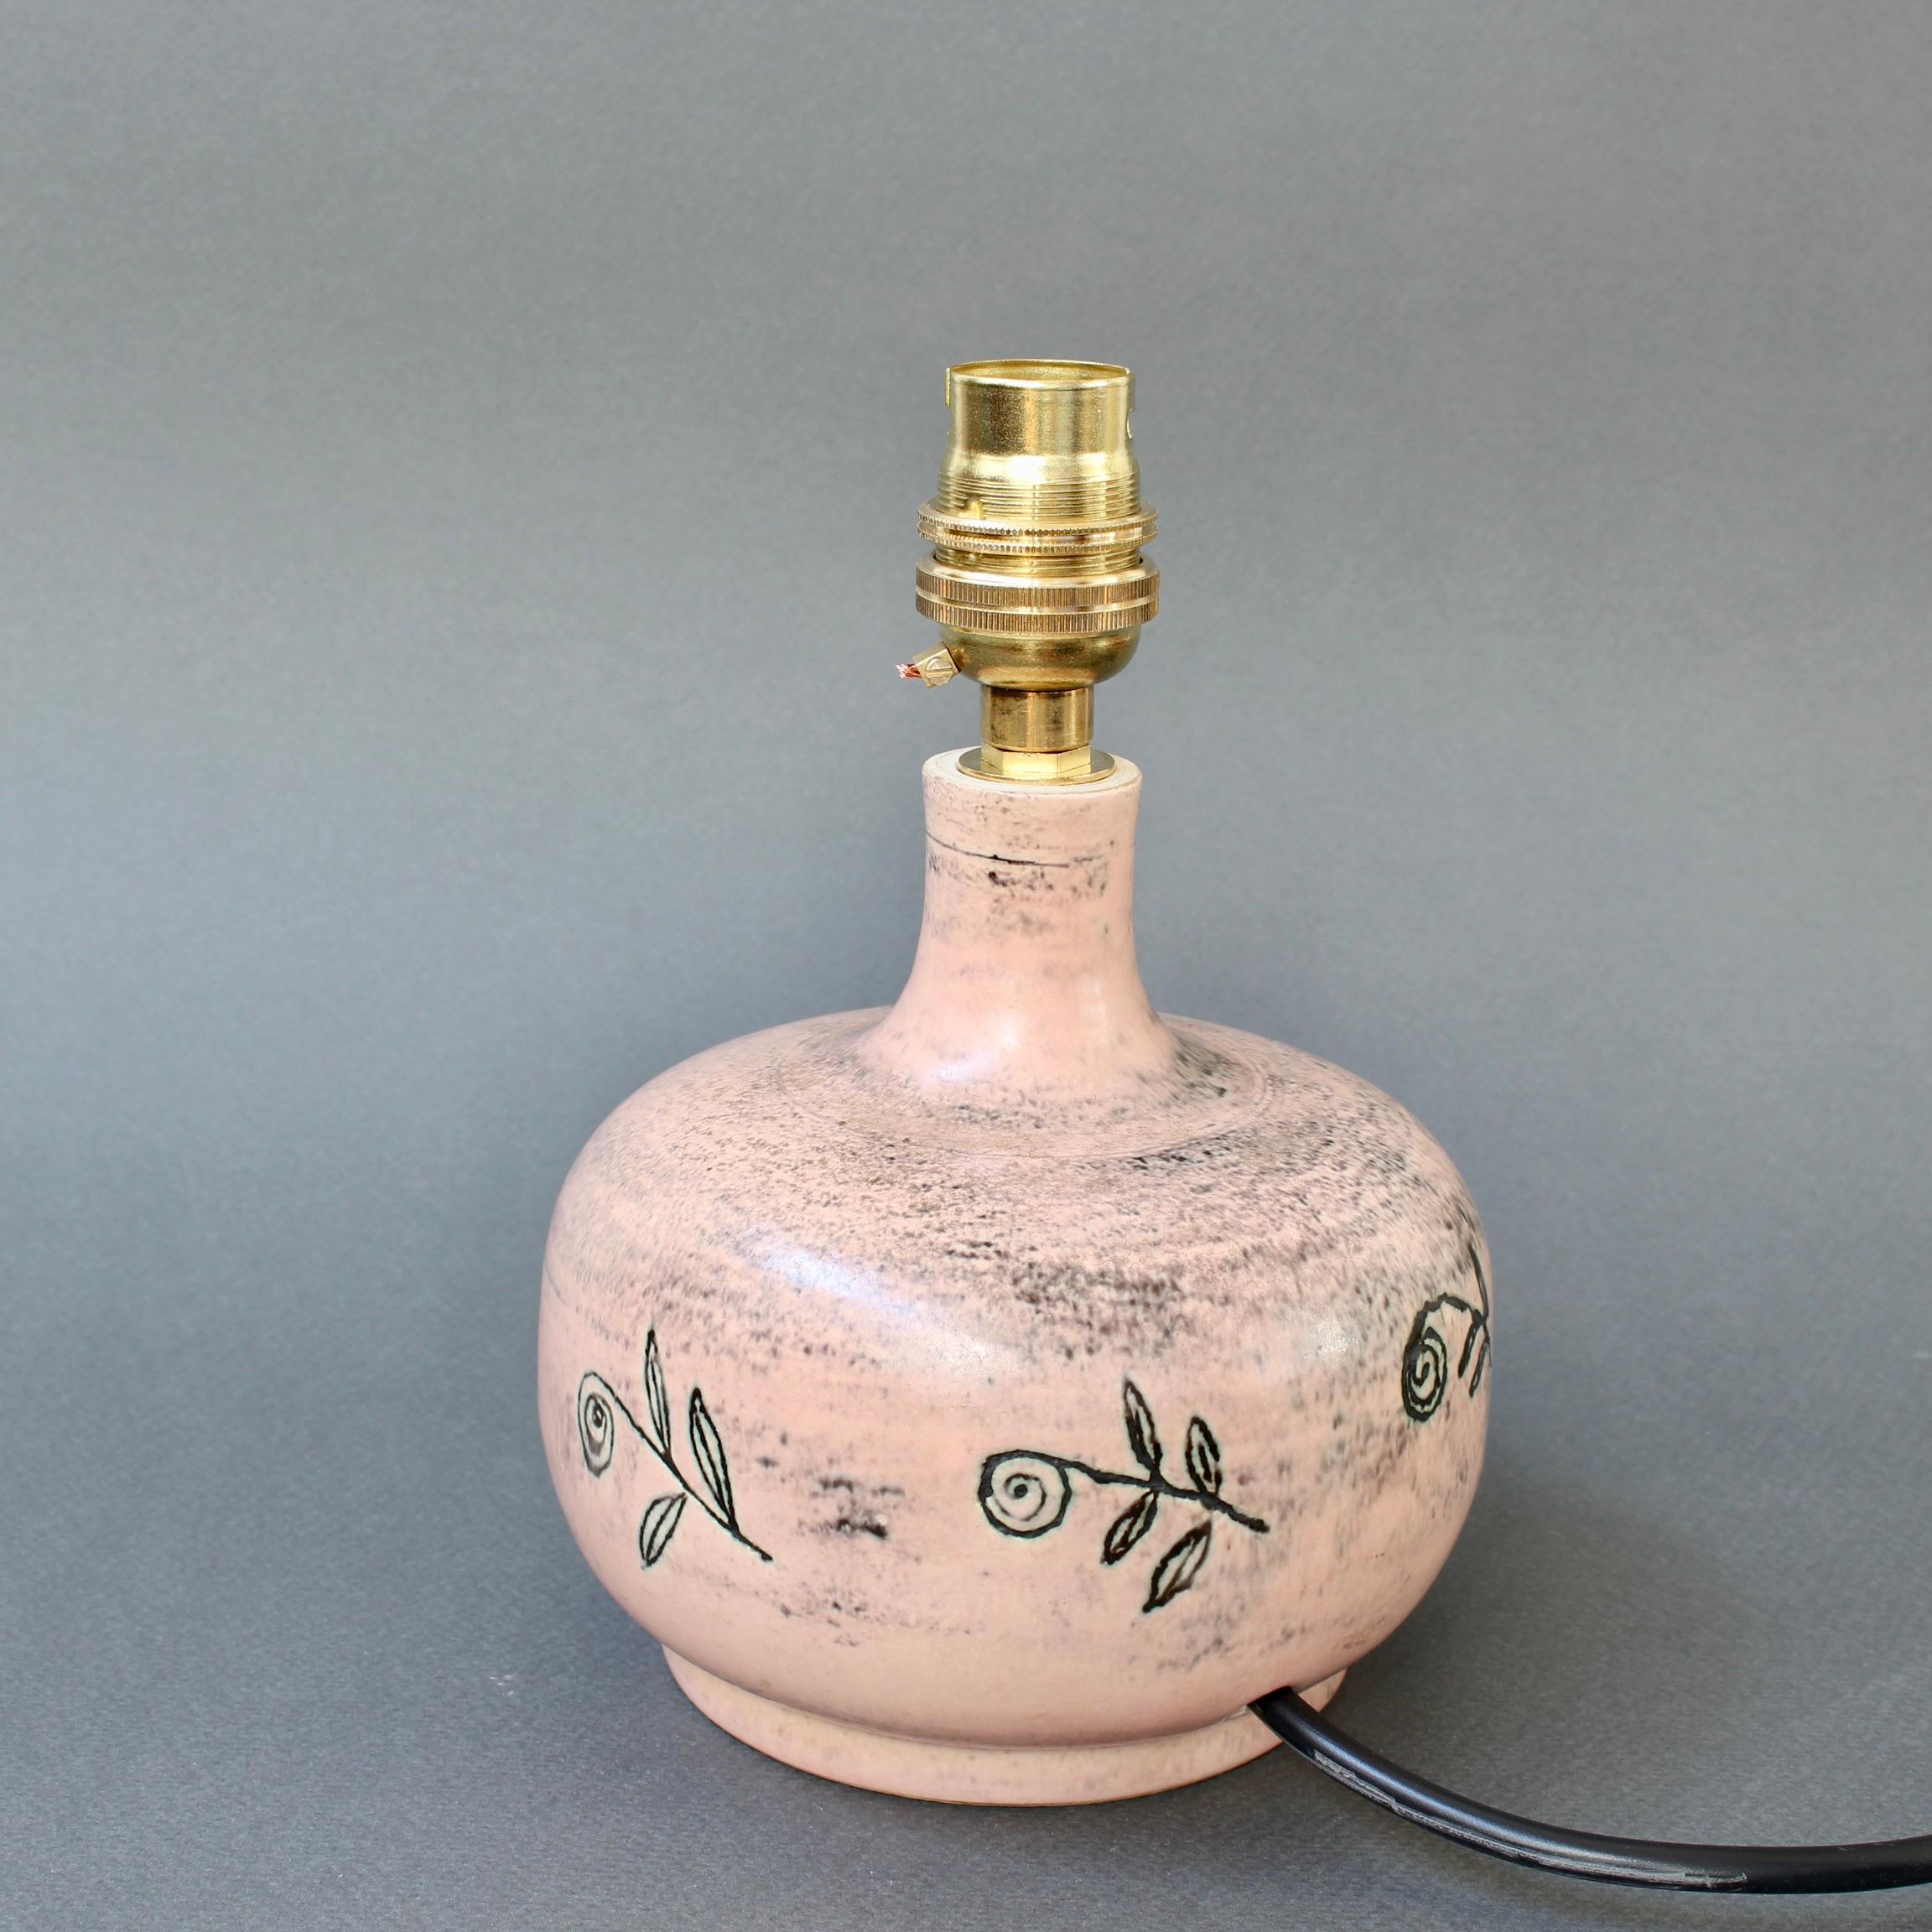 Mid-century ceramic table lamp (circa 1950s) by Jacques Blin. This diminutive pink-hued French lamp (c. 1950s) with sgraffito-etched leaves is in very good overall condition. This size makes this a perfect bedside table lamp with plenty of style.